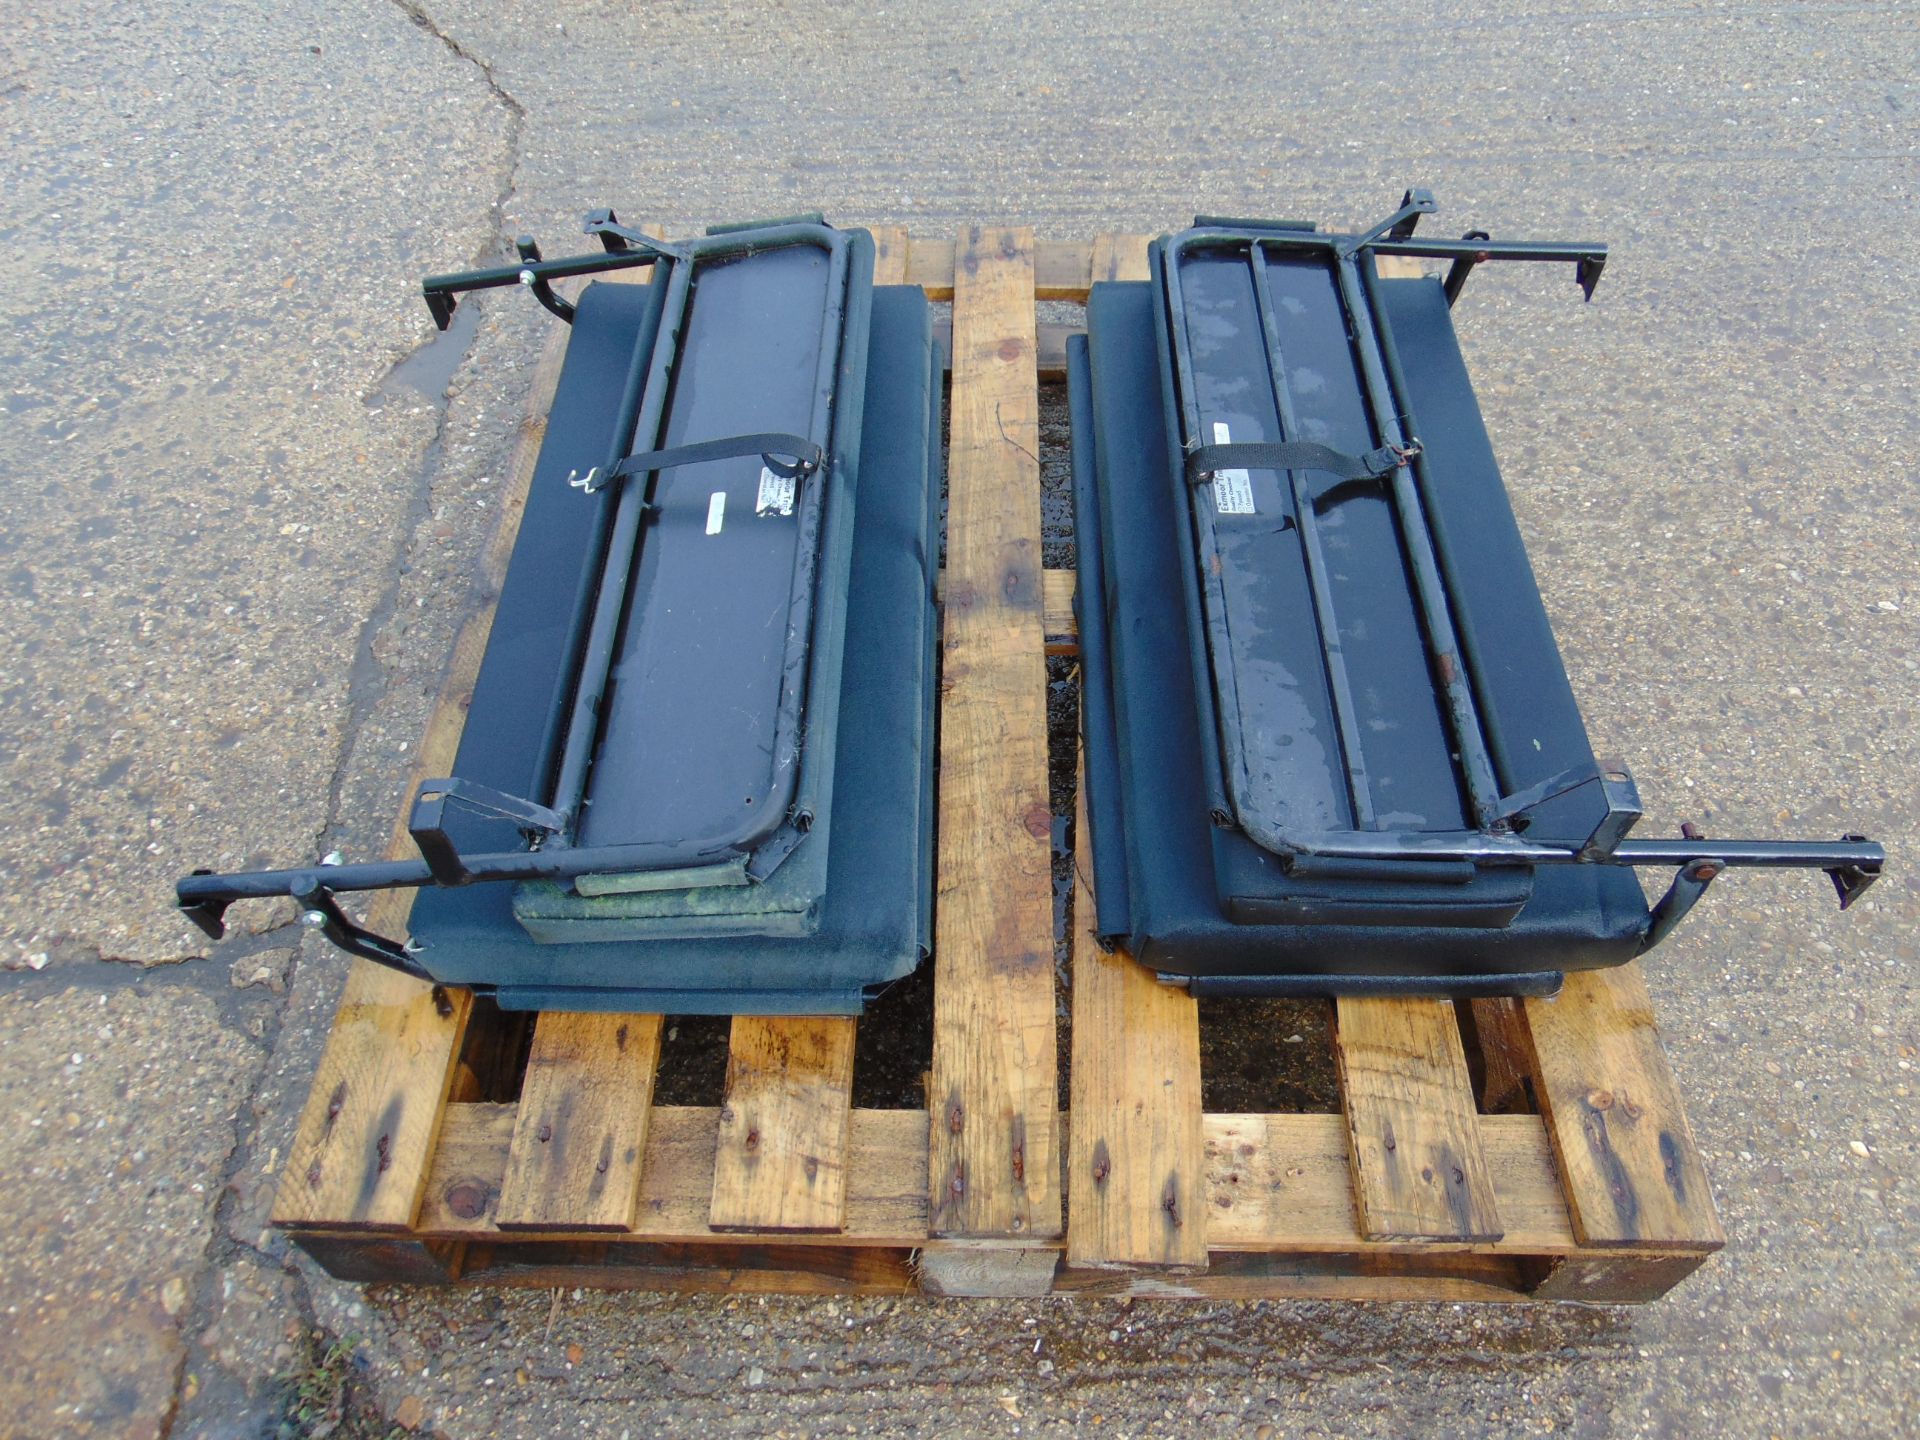 2 x Exmoor Trim Land Rover Defender Fold Down Rear Bench Seats - Image 4 of 5